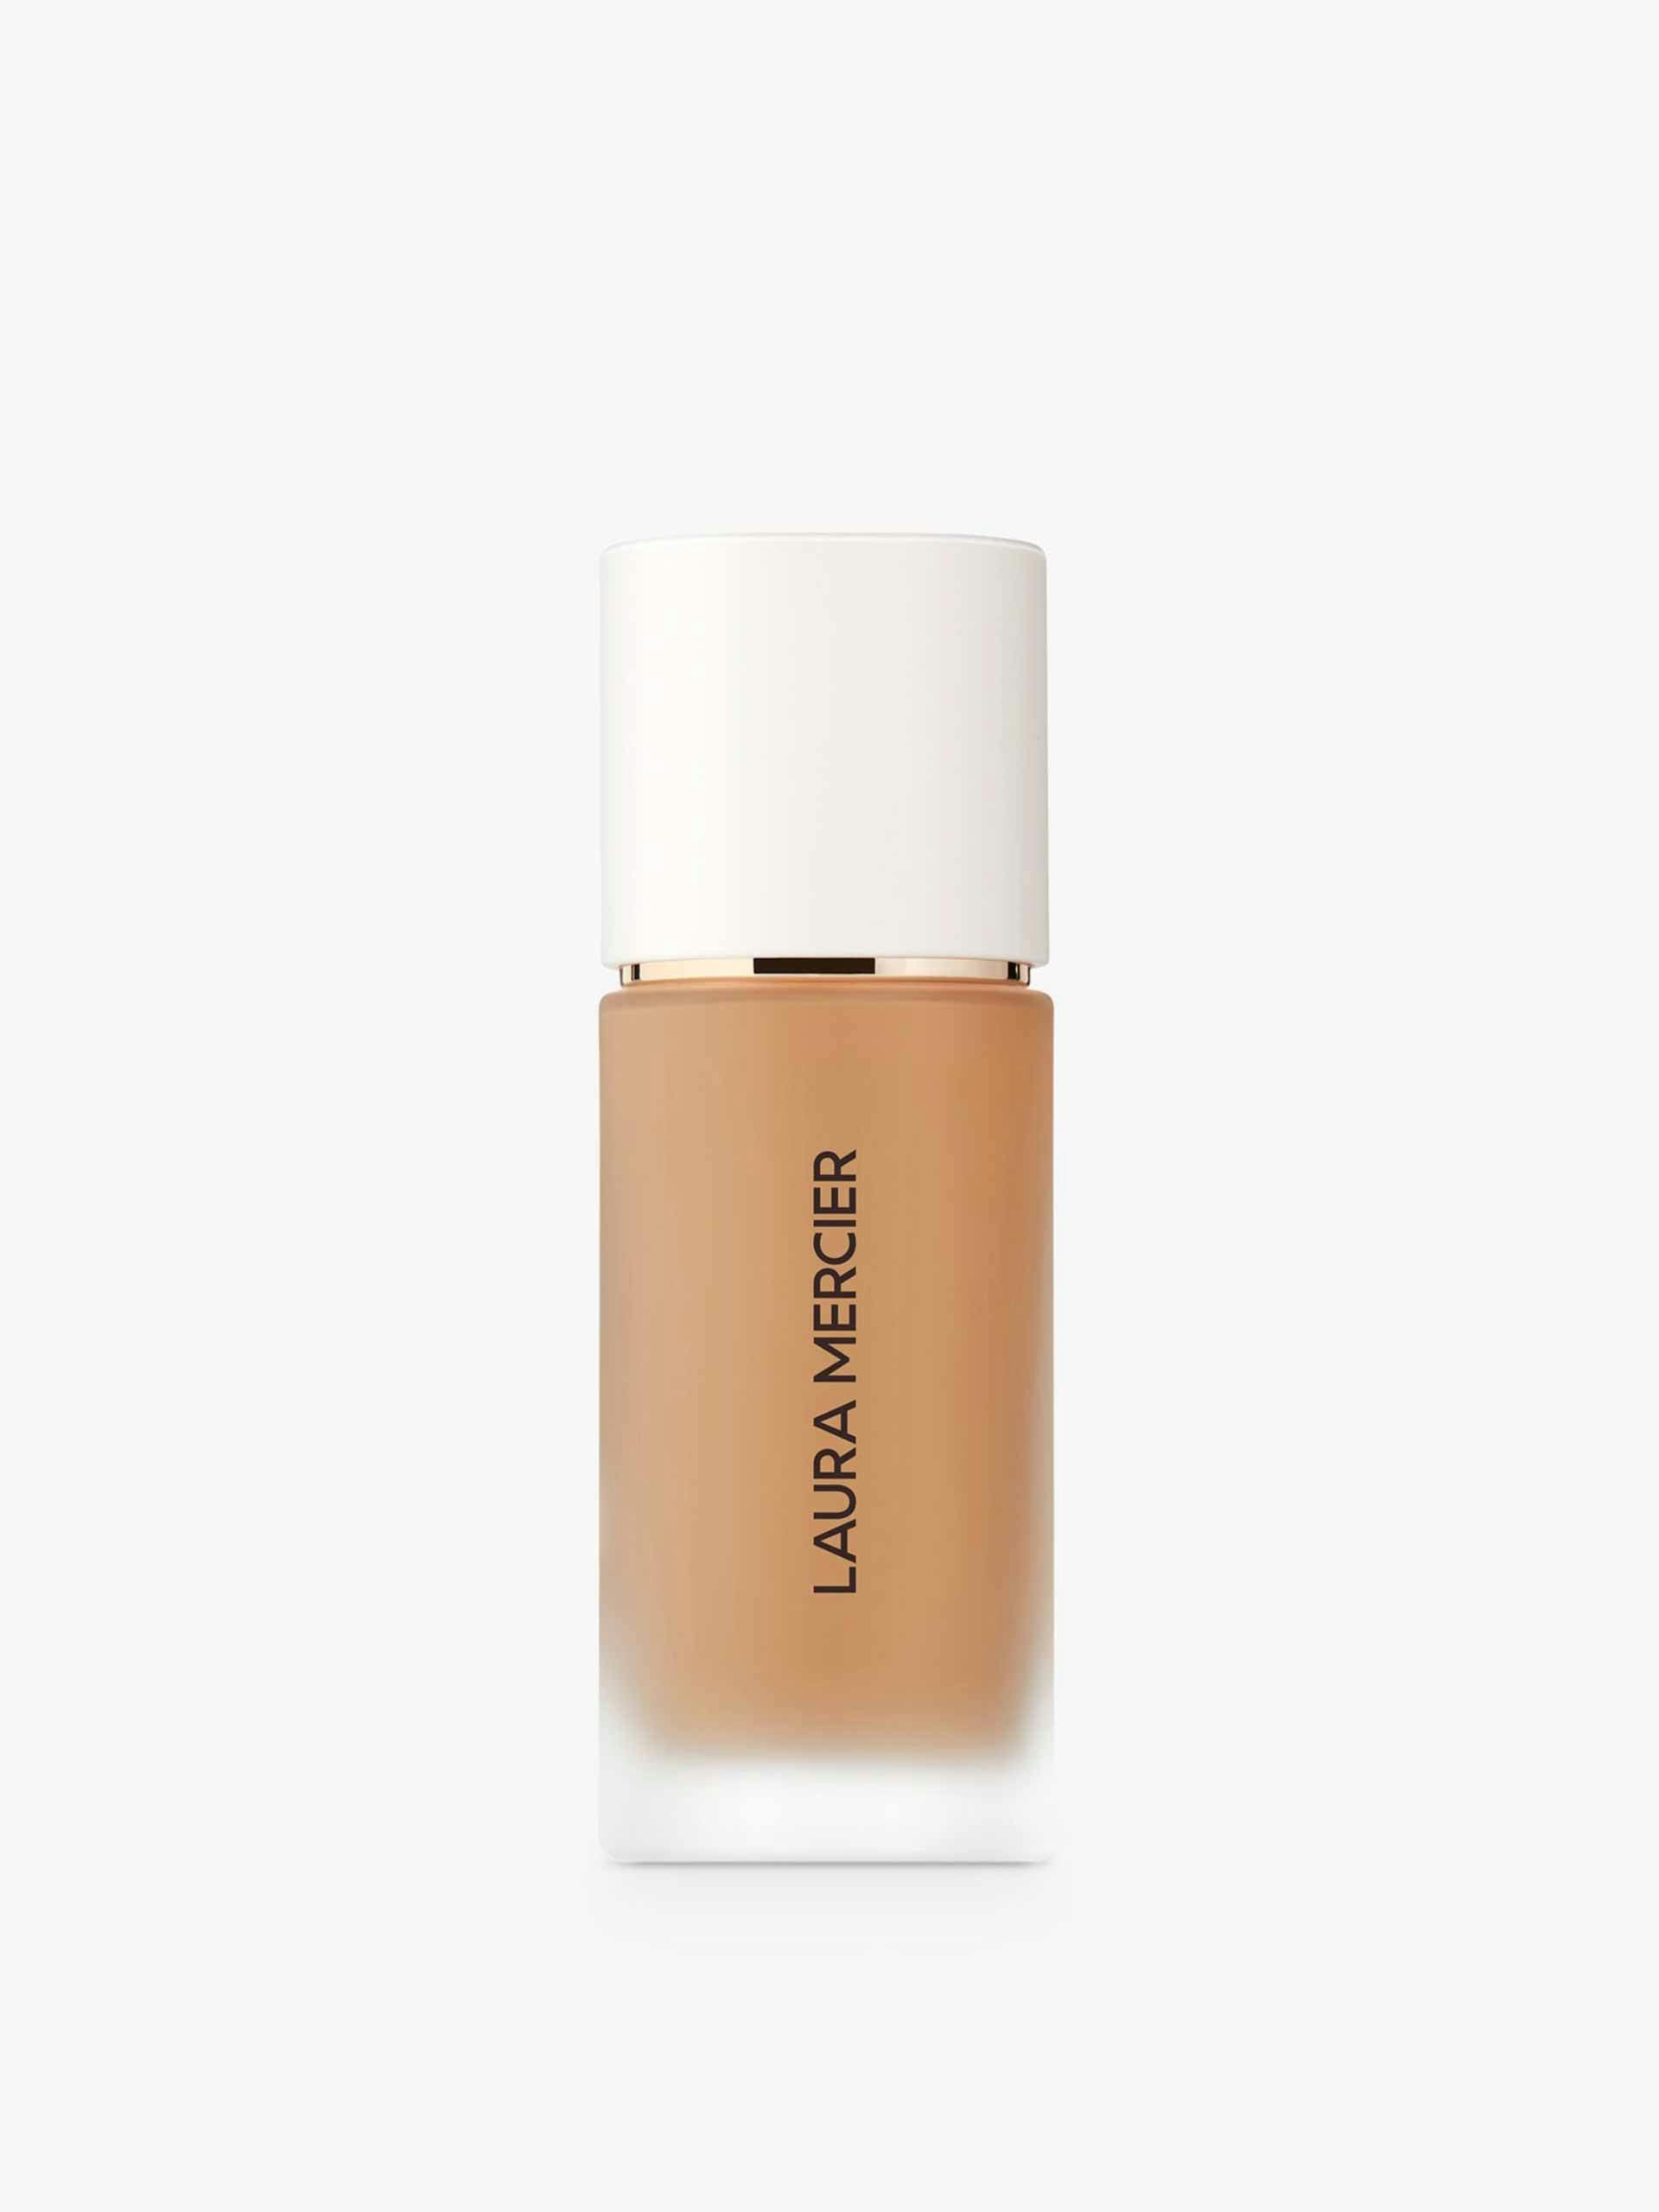 Real Flawless weightless foundation